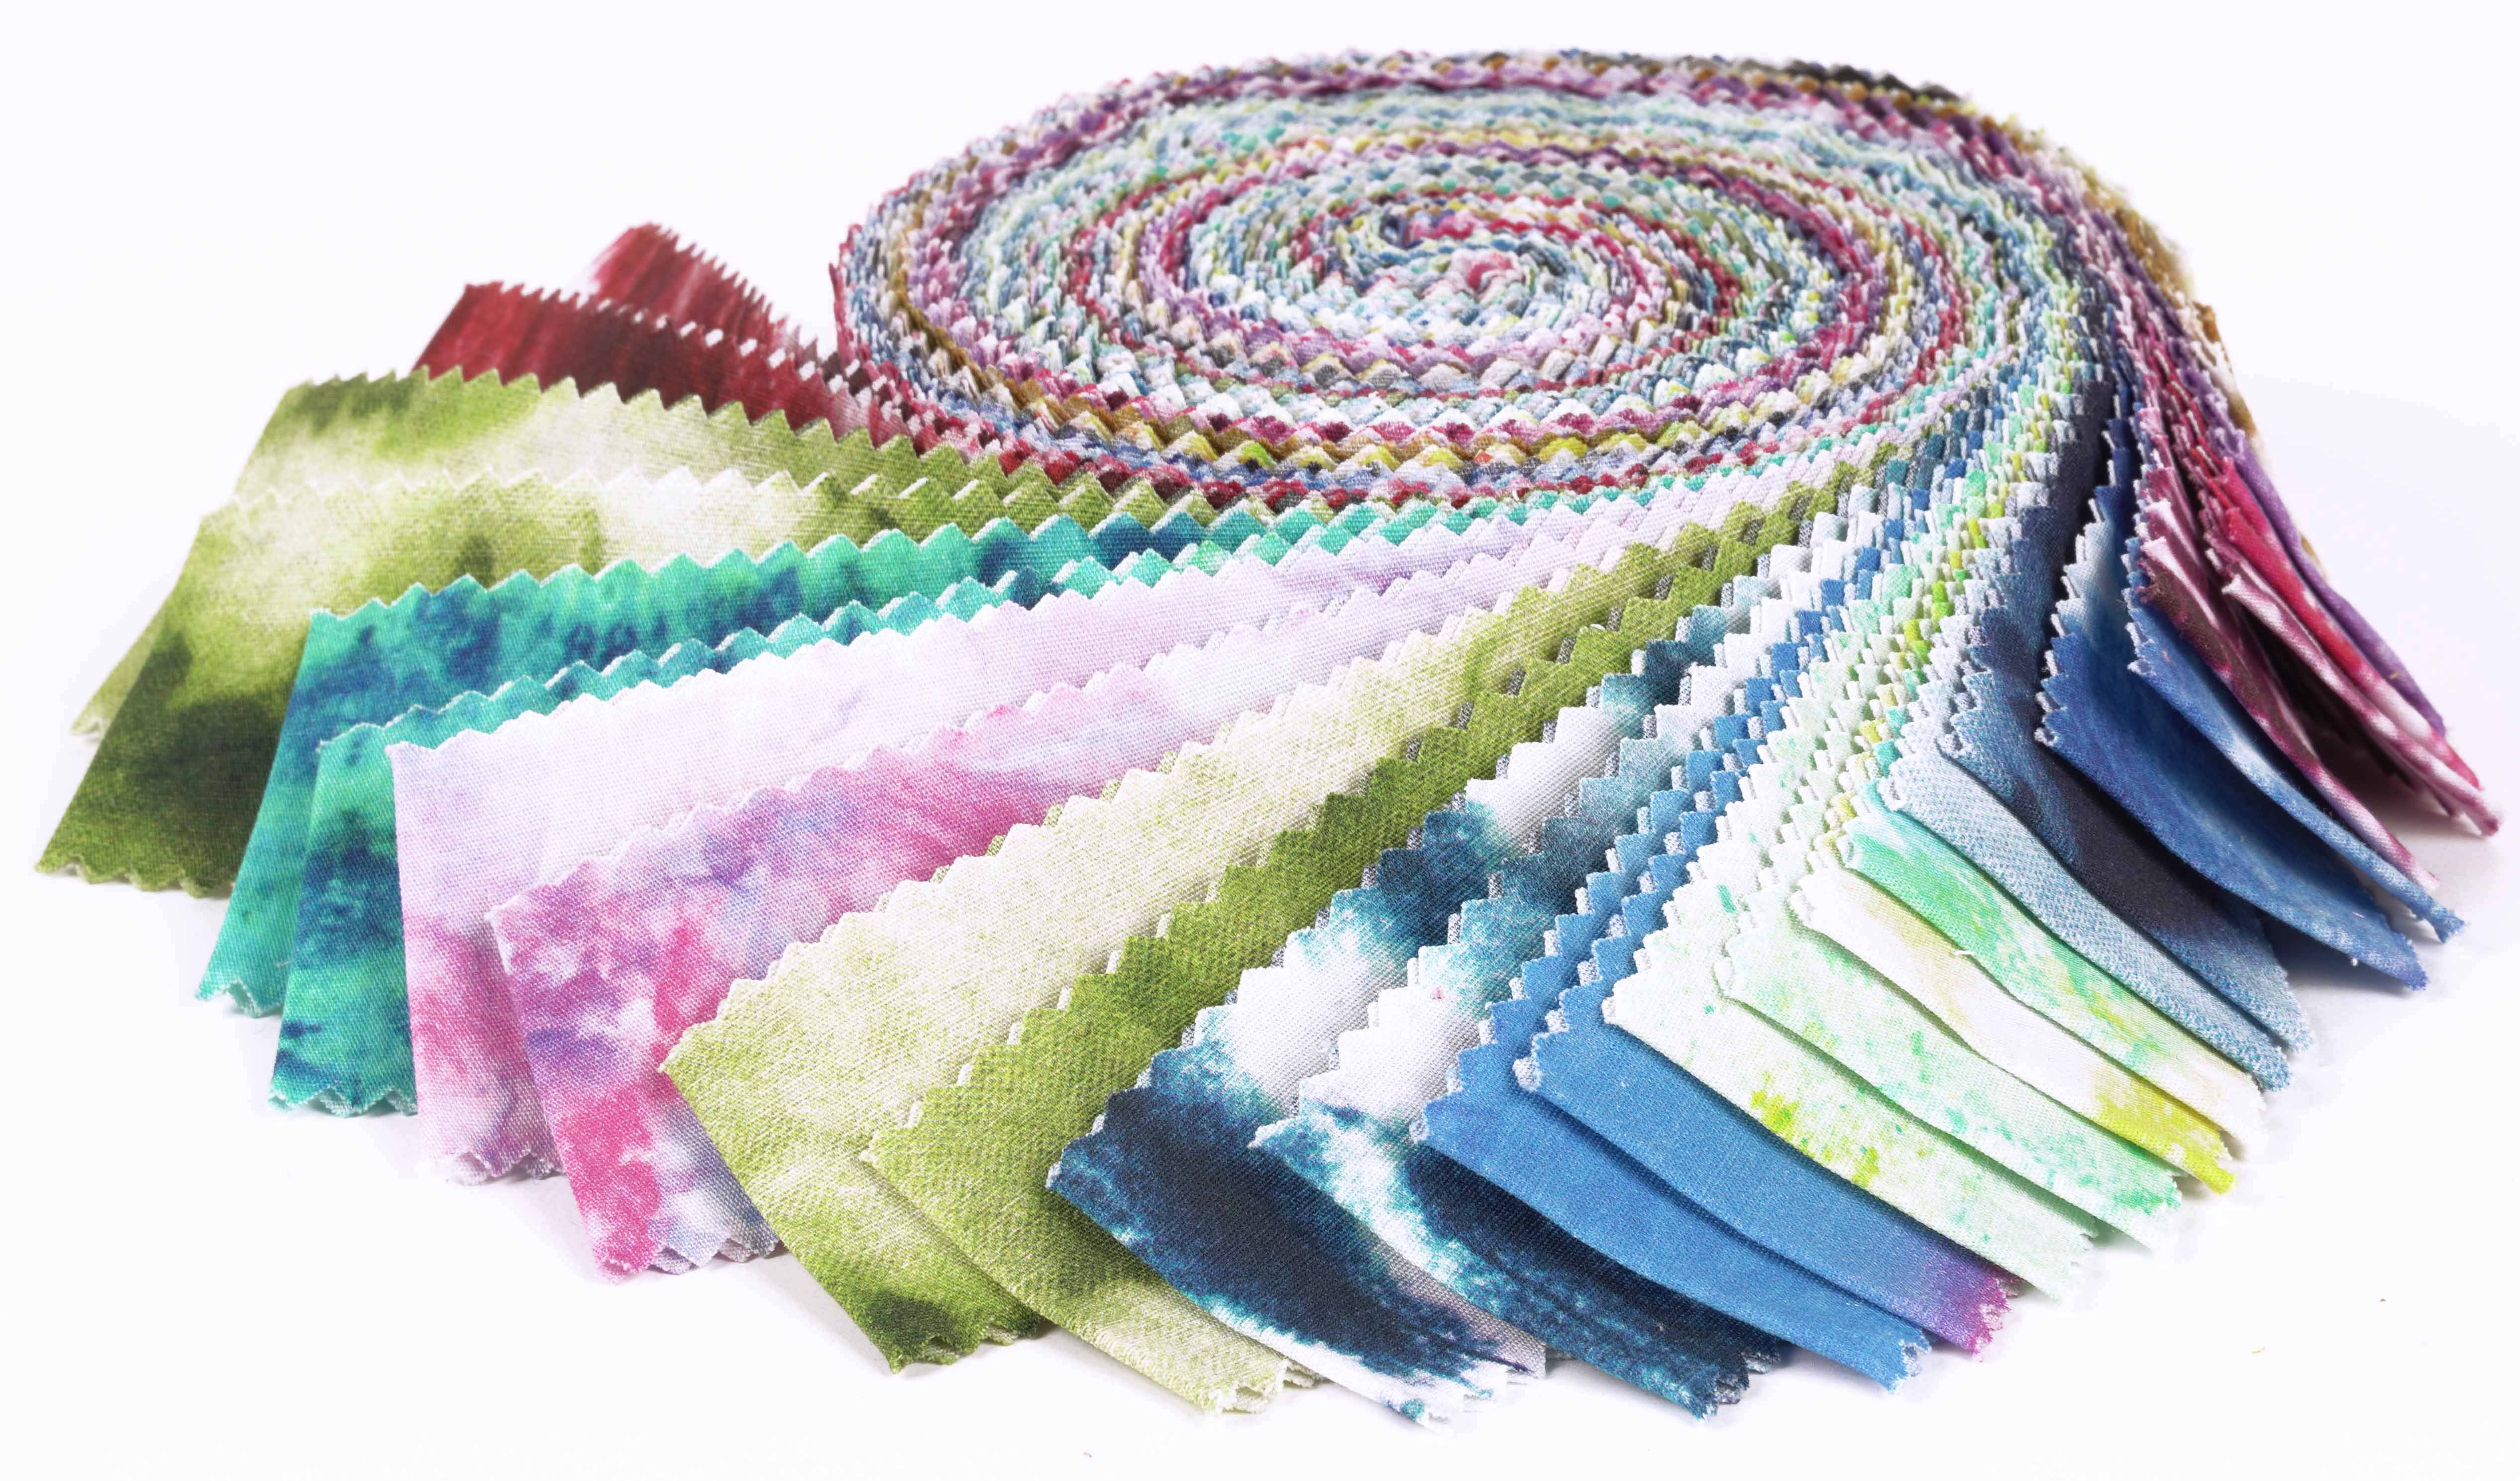 Soimoi 40Pcs Tie Dye Print Precut Fabrics Strips Roll Up 1.5x42inches  Cotton Jelly Rolls for Quilting - Blue